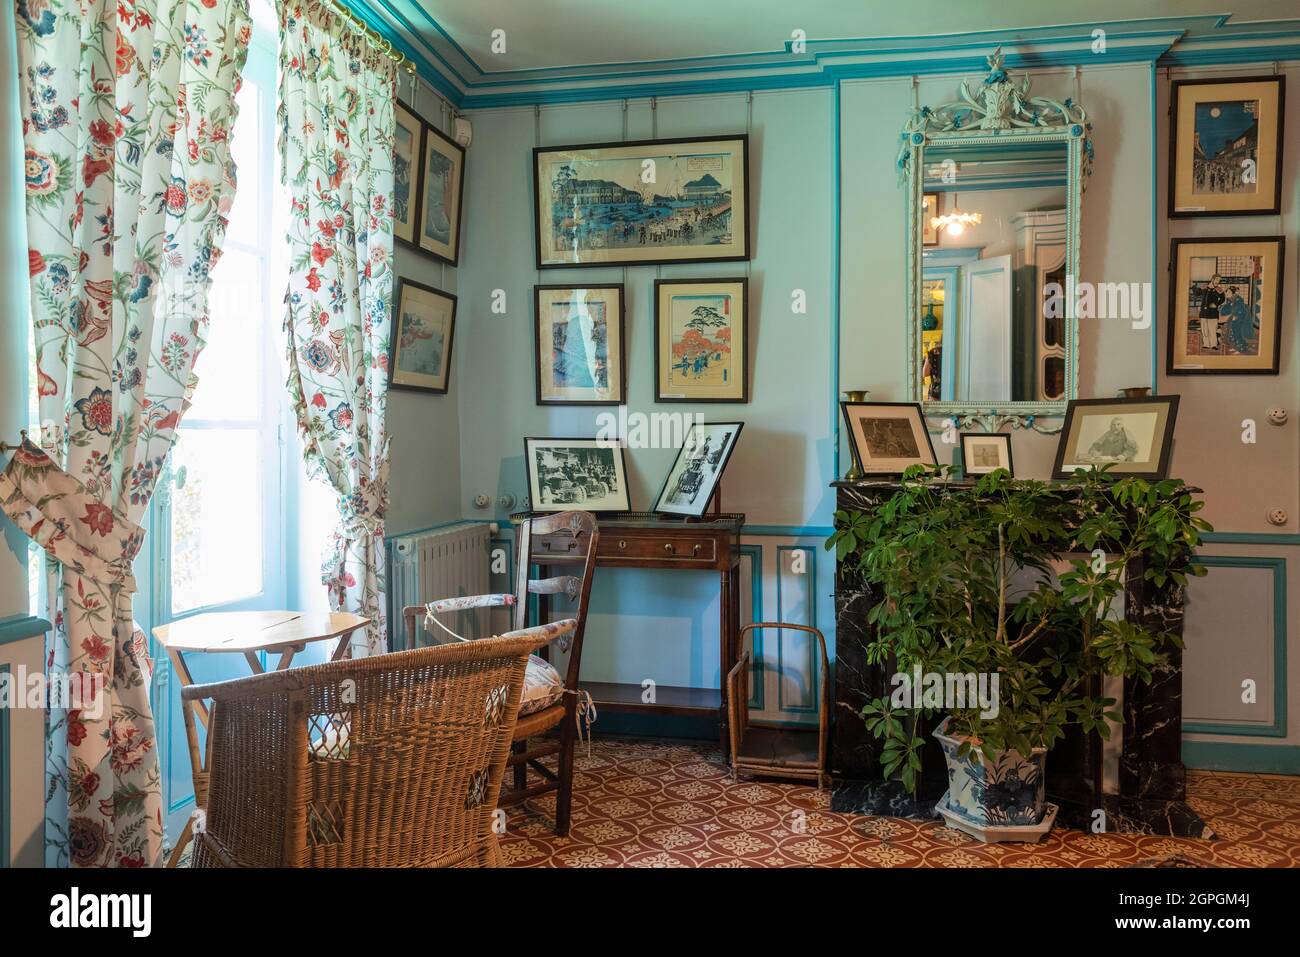 France, Eure, Giverny, Claude Monet Foundation, the house, sitting room Stock Photo